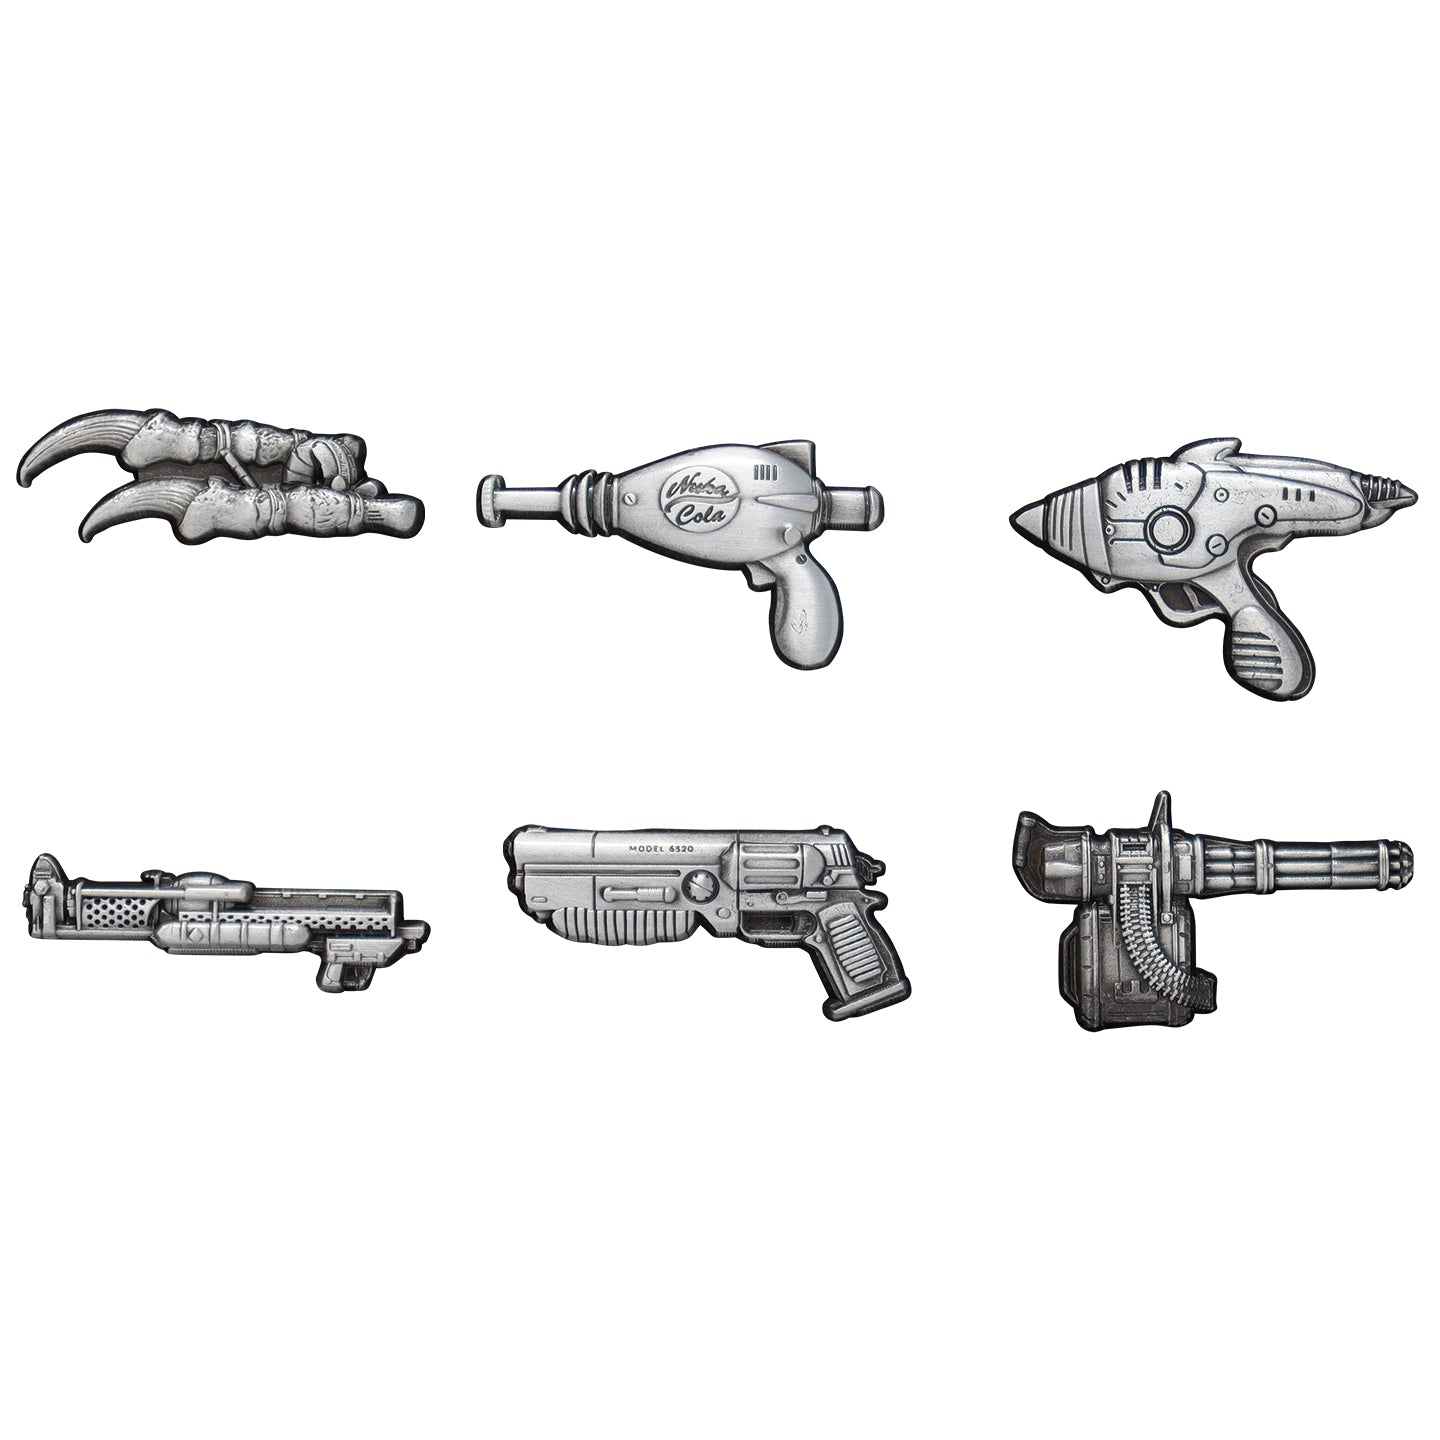 Fallout Limited Edition Set of 6 Weapons Pin Badges